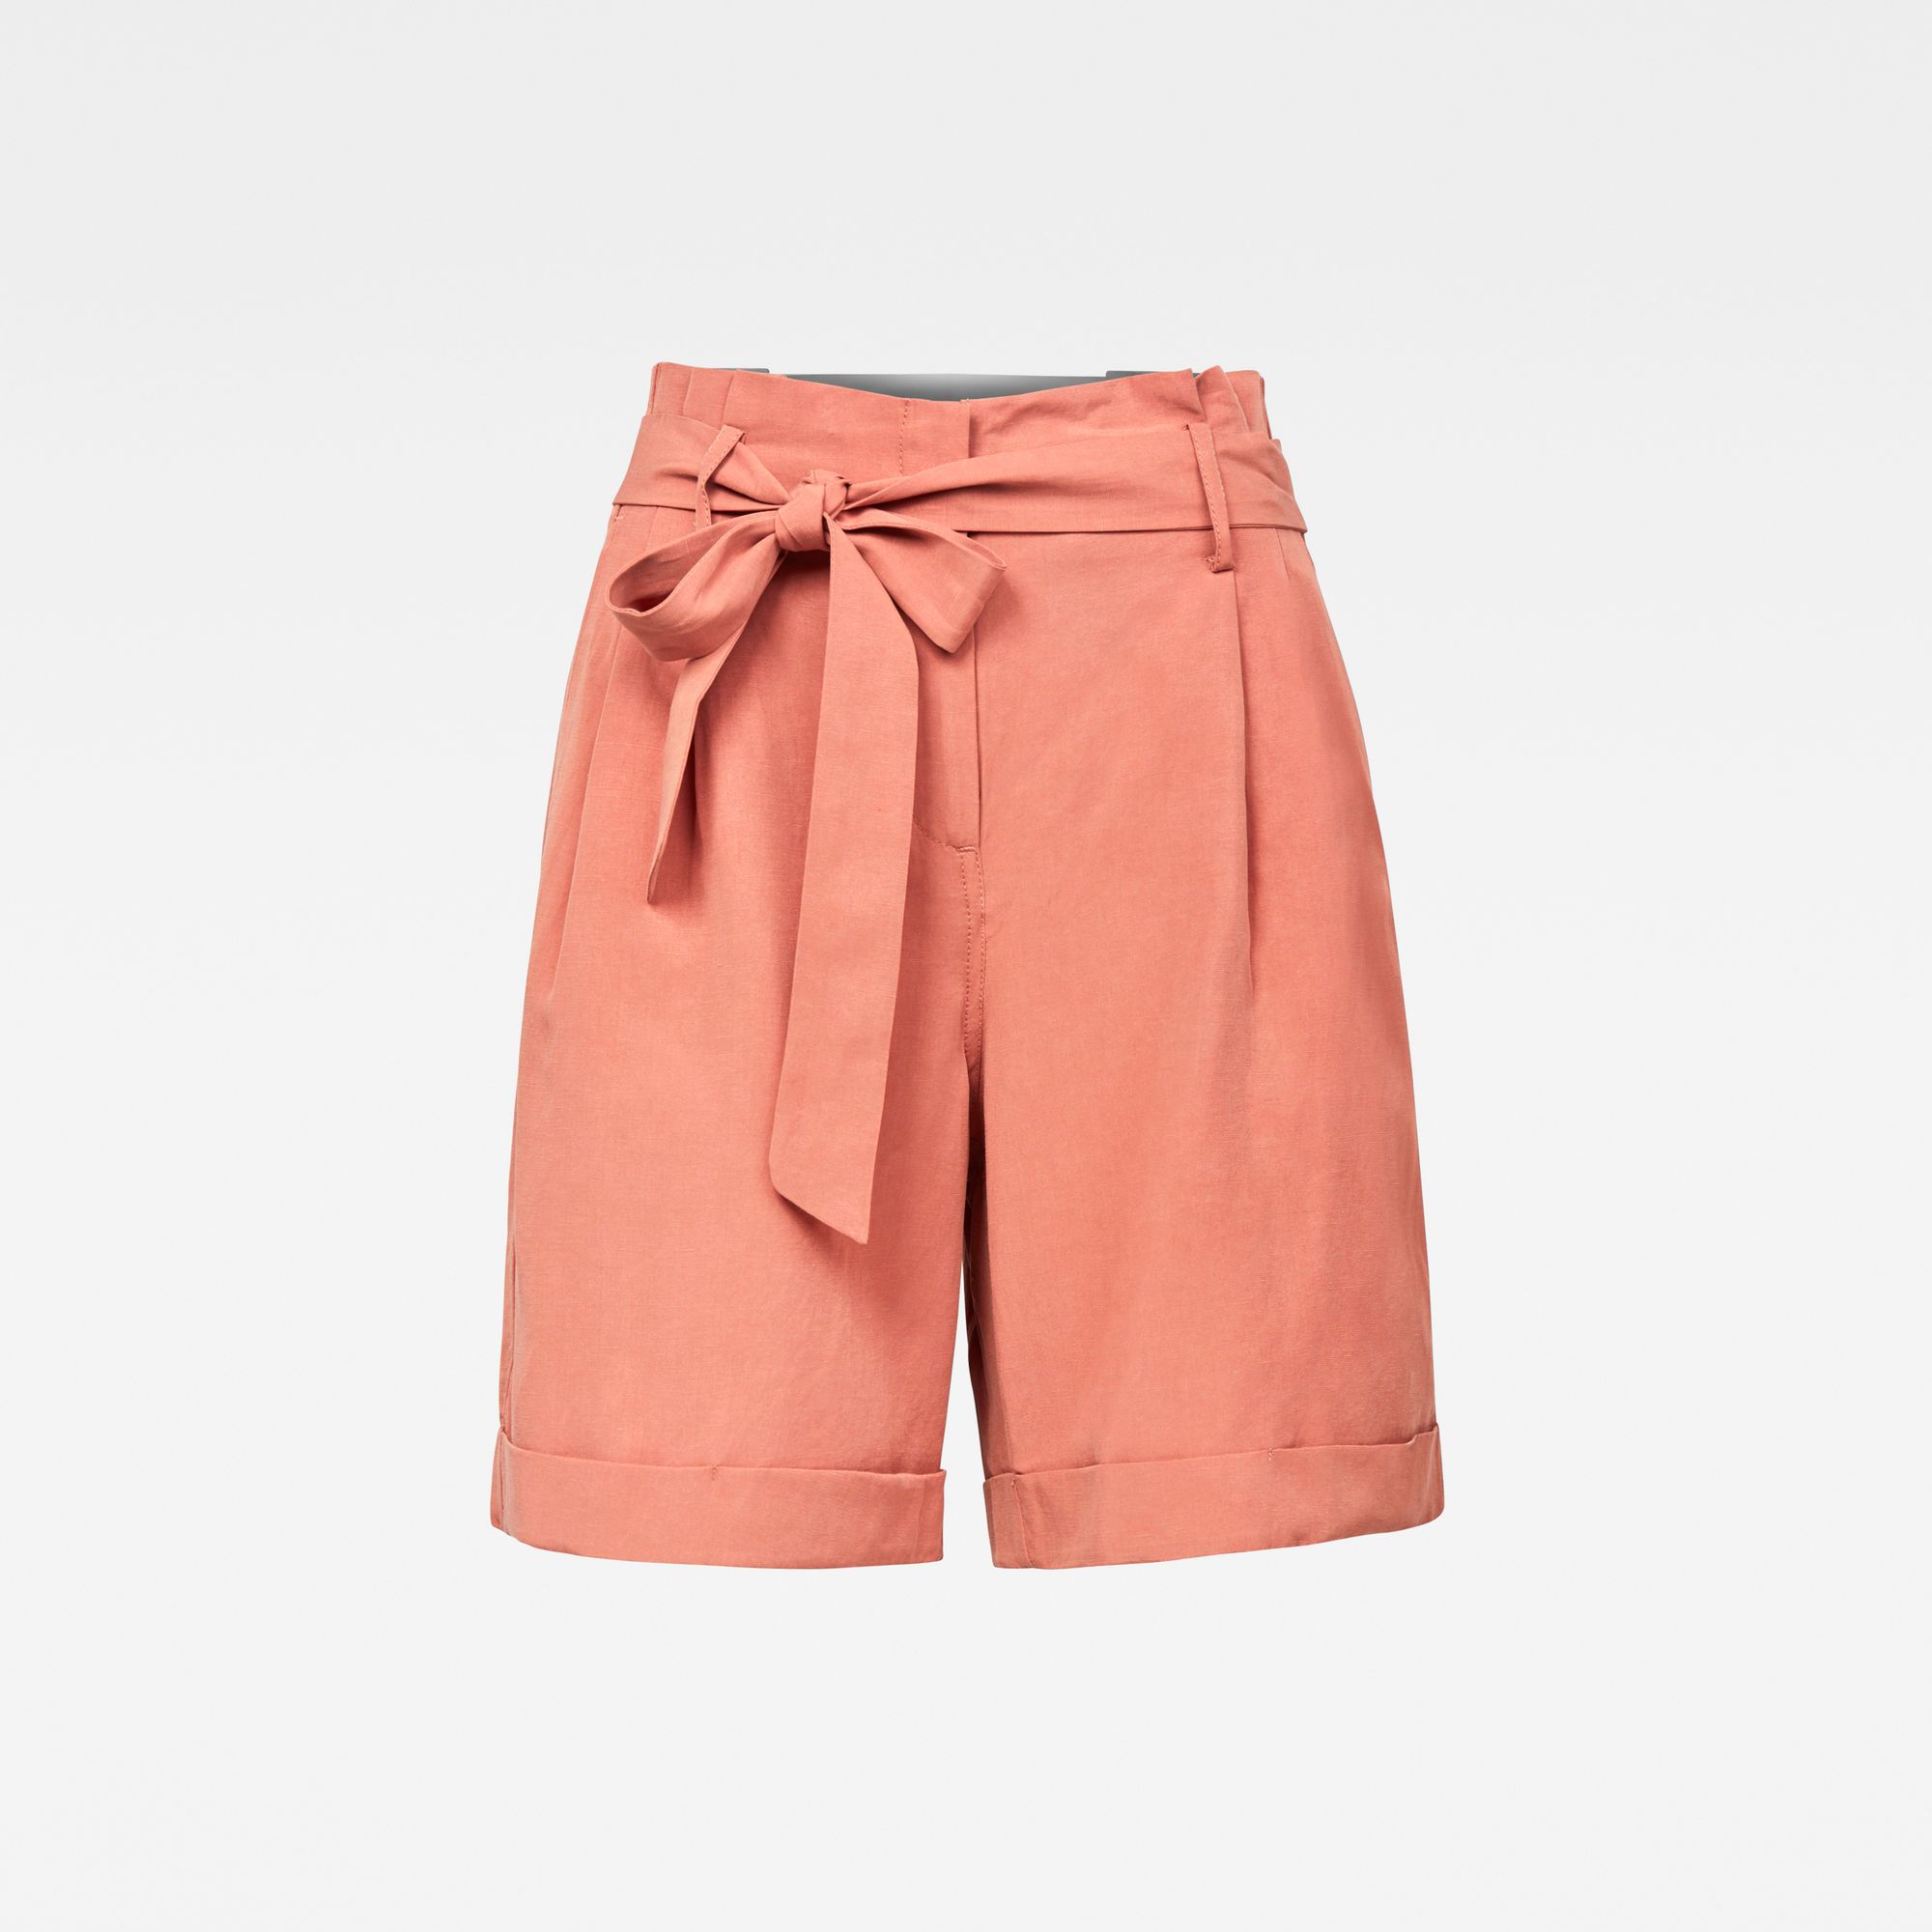 Fitted waistband. High waist. Pleated front- stitch down. Sideseam pockets and slim welt back pockets. Zip fly. G-Star RAW woven label at the upper hip. Zip & button closure. High waist. 85% Lyocell (Tencelâ„¢), 15% Linen. The pleats at the front of this bermuda length shorts are reinforced with a strong stitch down. A high waisted short with sidepocket and slim welt back pockets. The backside of the Pleated High short is designed with additional seams at the upper hip to create a slim fit upper back. Woven